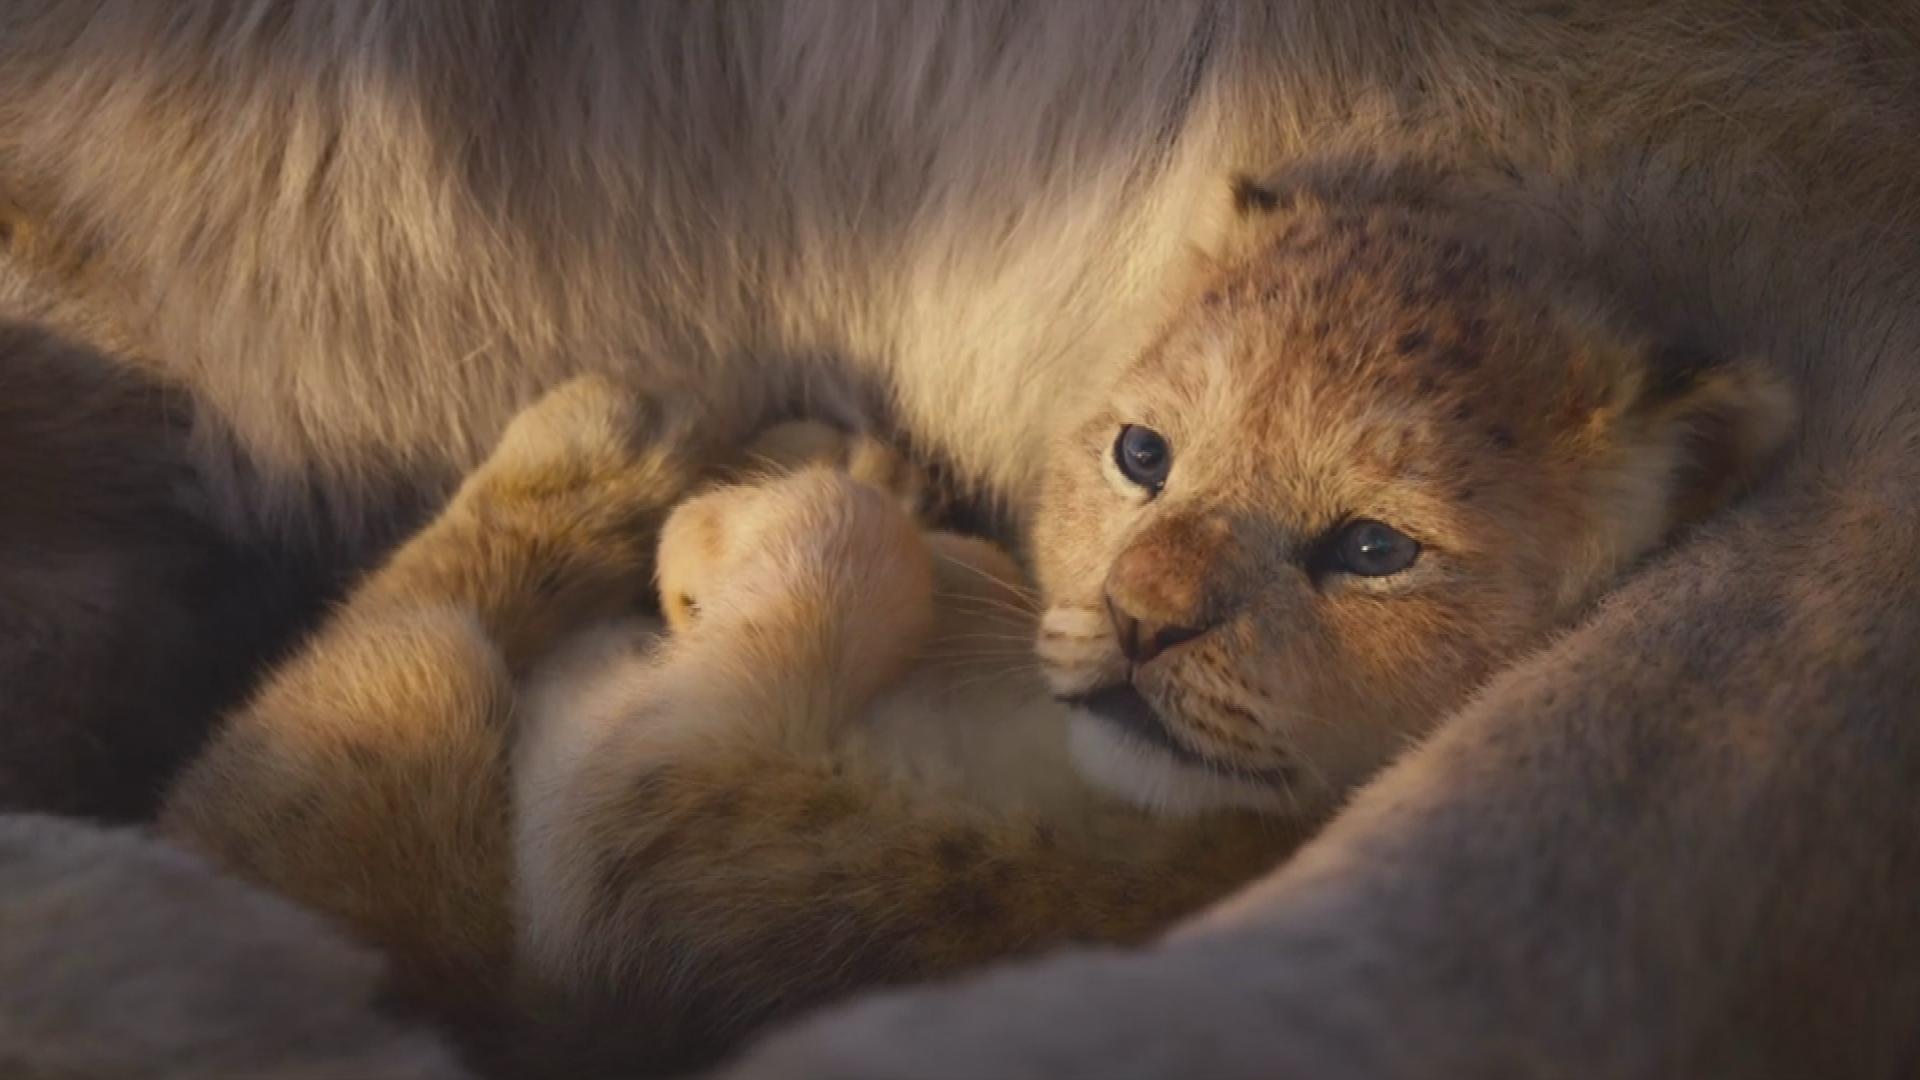 The Lion King': New Live Action Shows Off 'Circle Of Life'